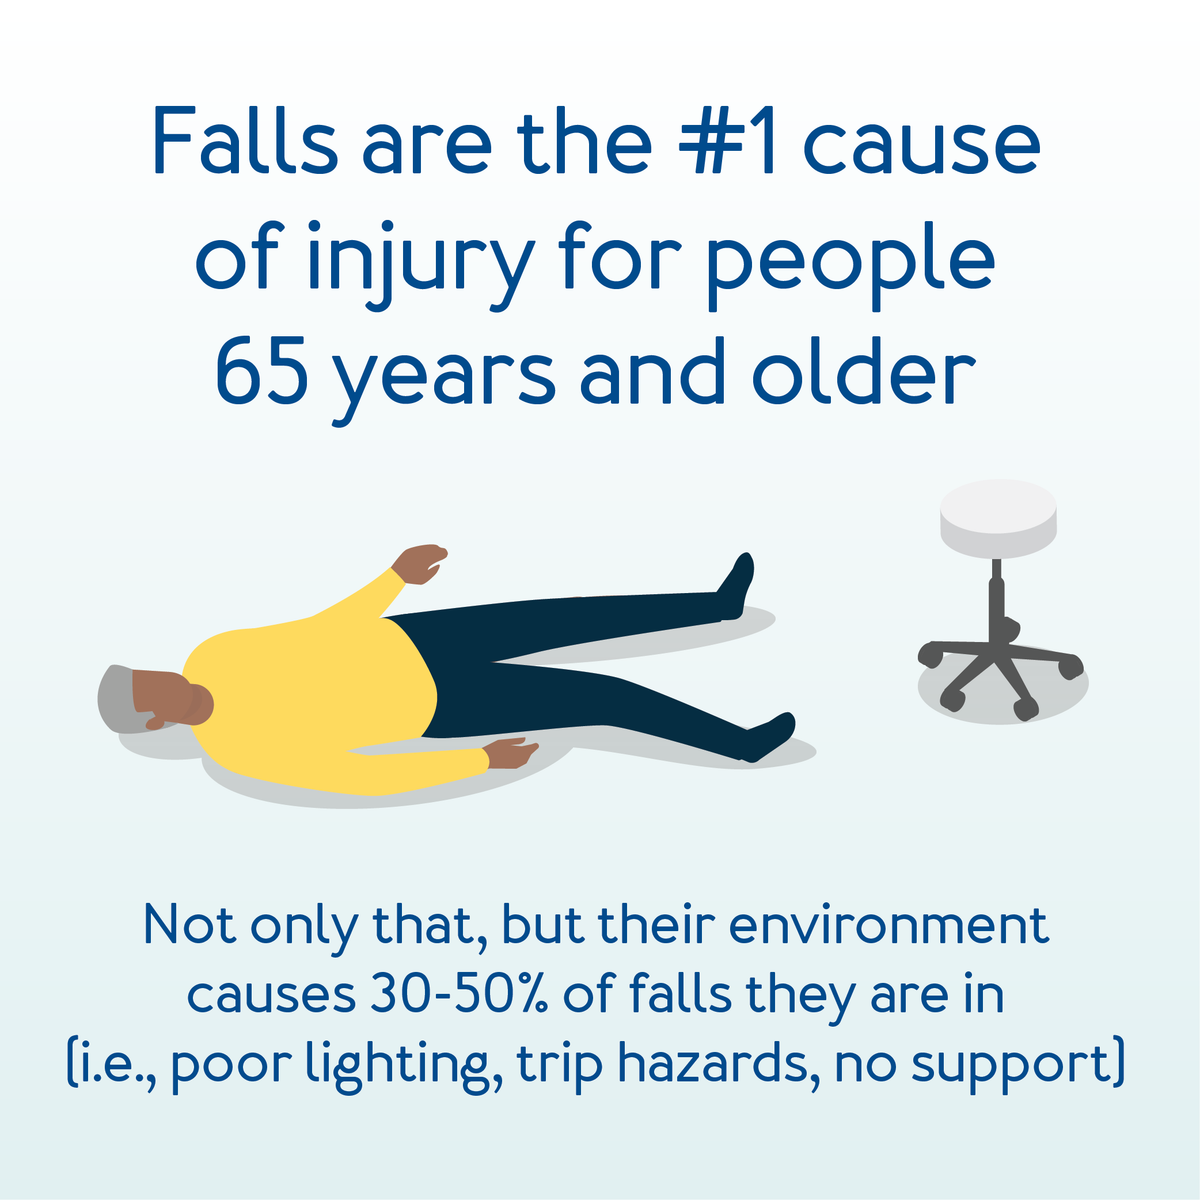 Falls are the number one cause of injury for people 65 years and older.further details are provided below.